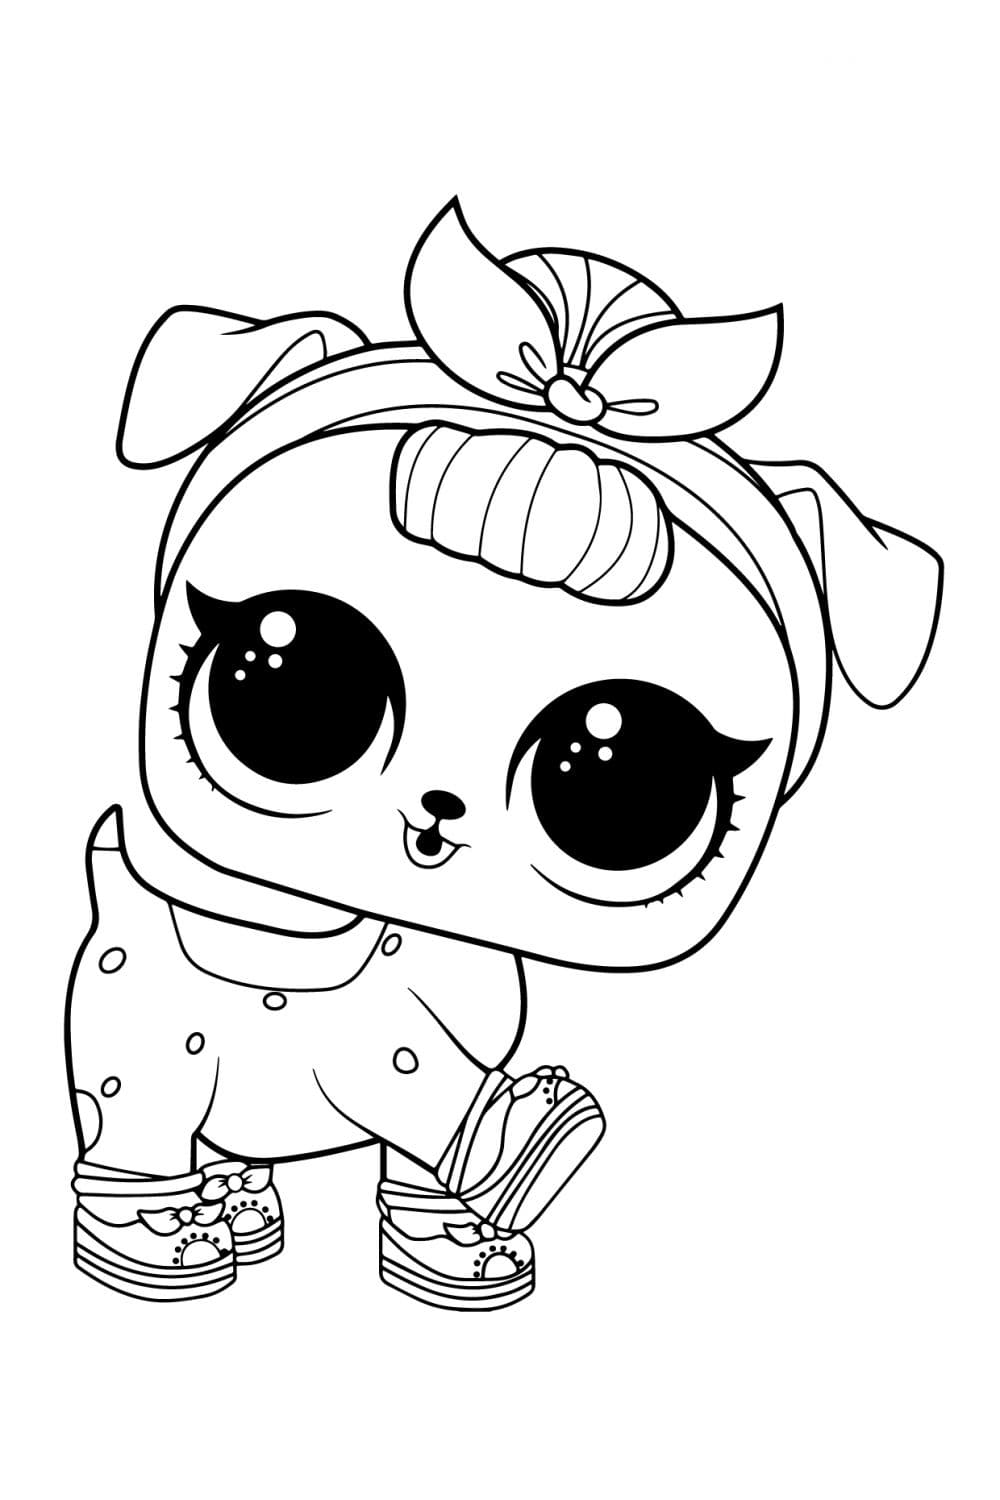 LOL Pet Puppy BBC Coloring Page - Free Printable Coloring Pages for Kids